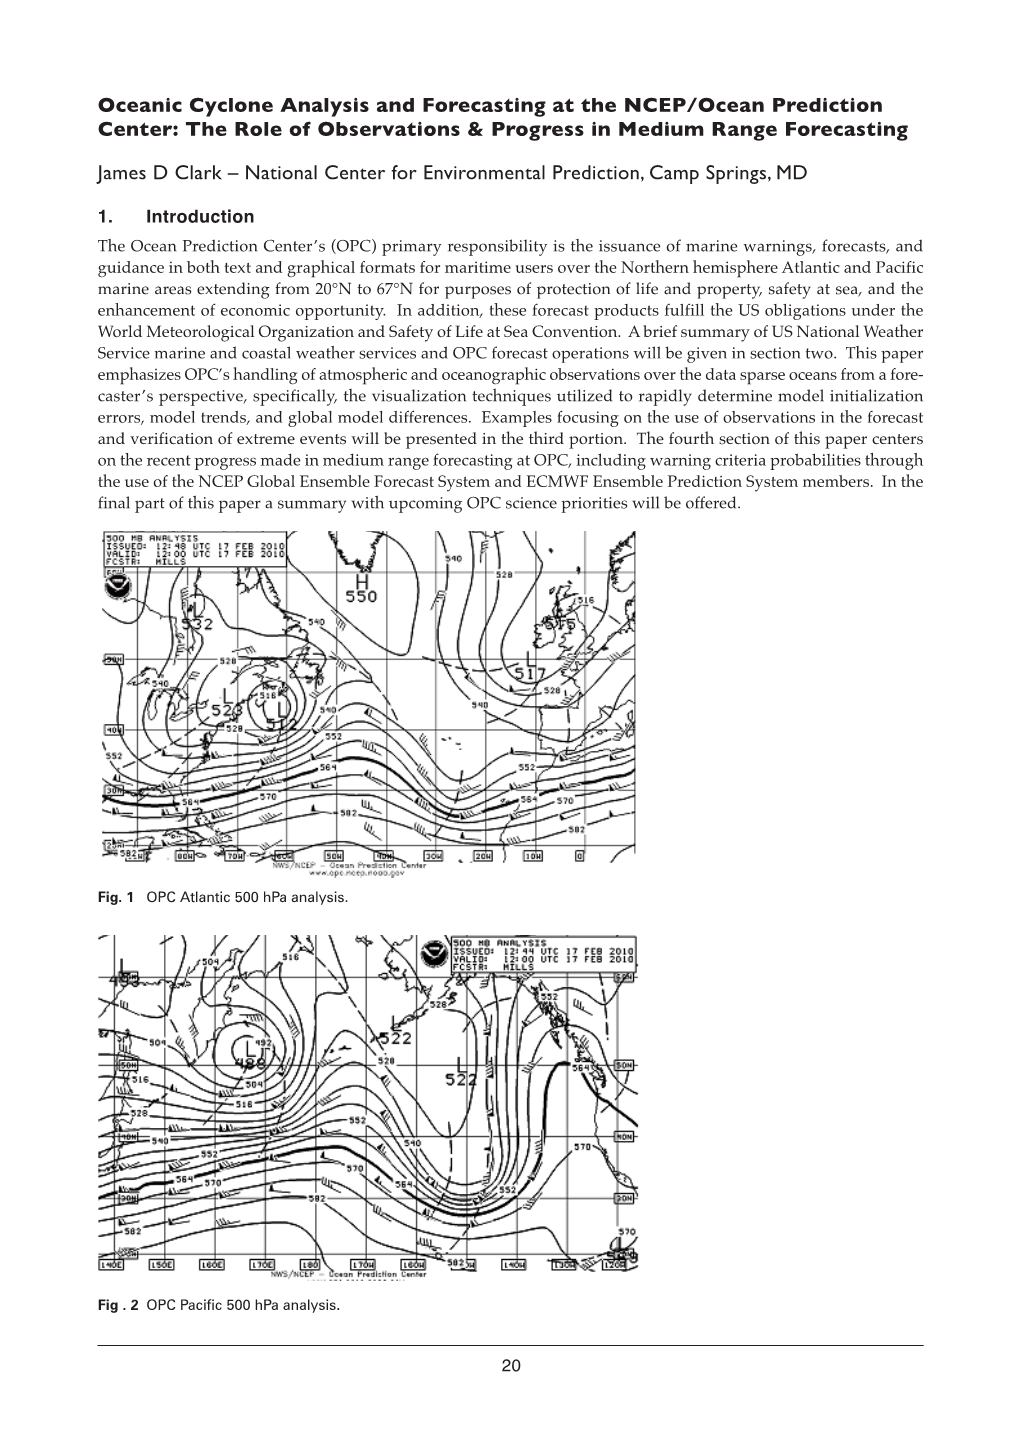 Oceanic Cyclone Analysis and Forecasting at the NCEP/Ocean Prediction Center: the Role of Observations & Progress in Medium Range Forecasting